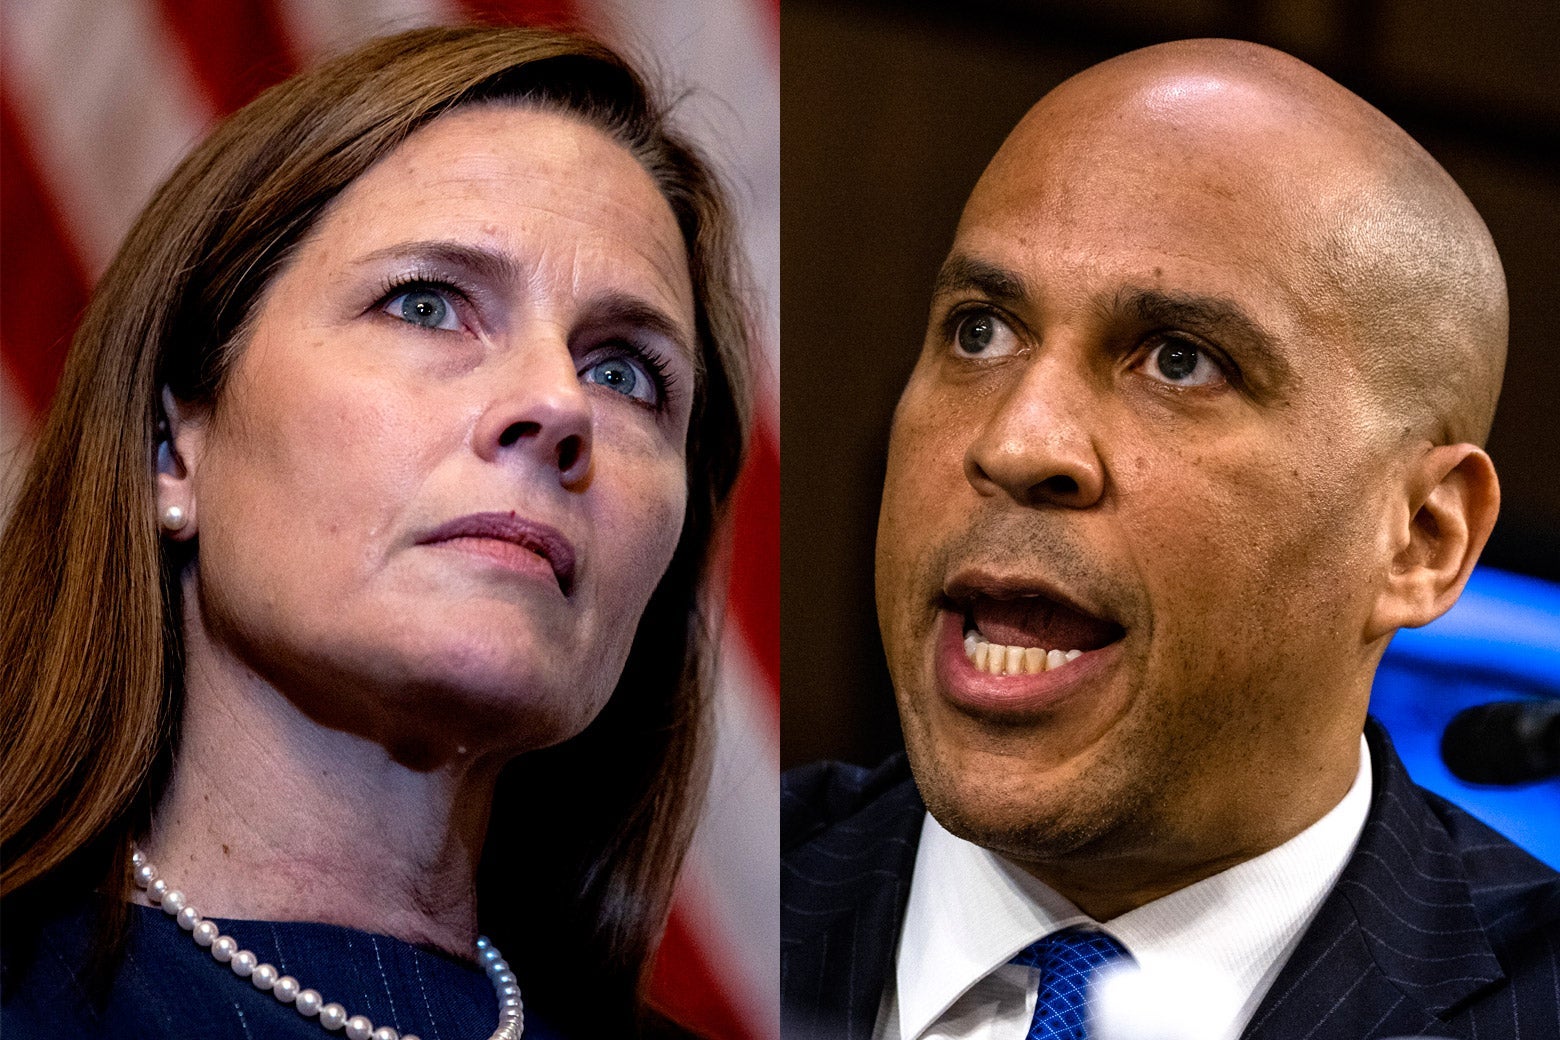 Amy Coney Barrett headshot on the left and Cory Booker headshot on the right